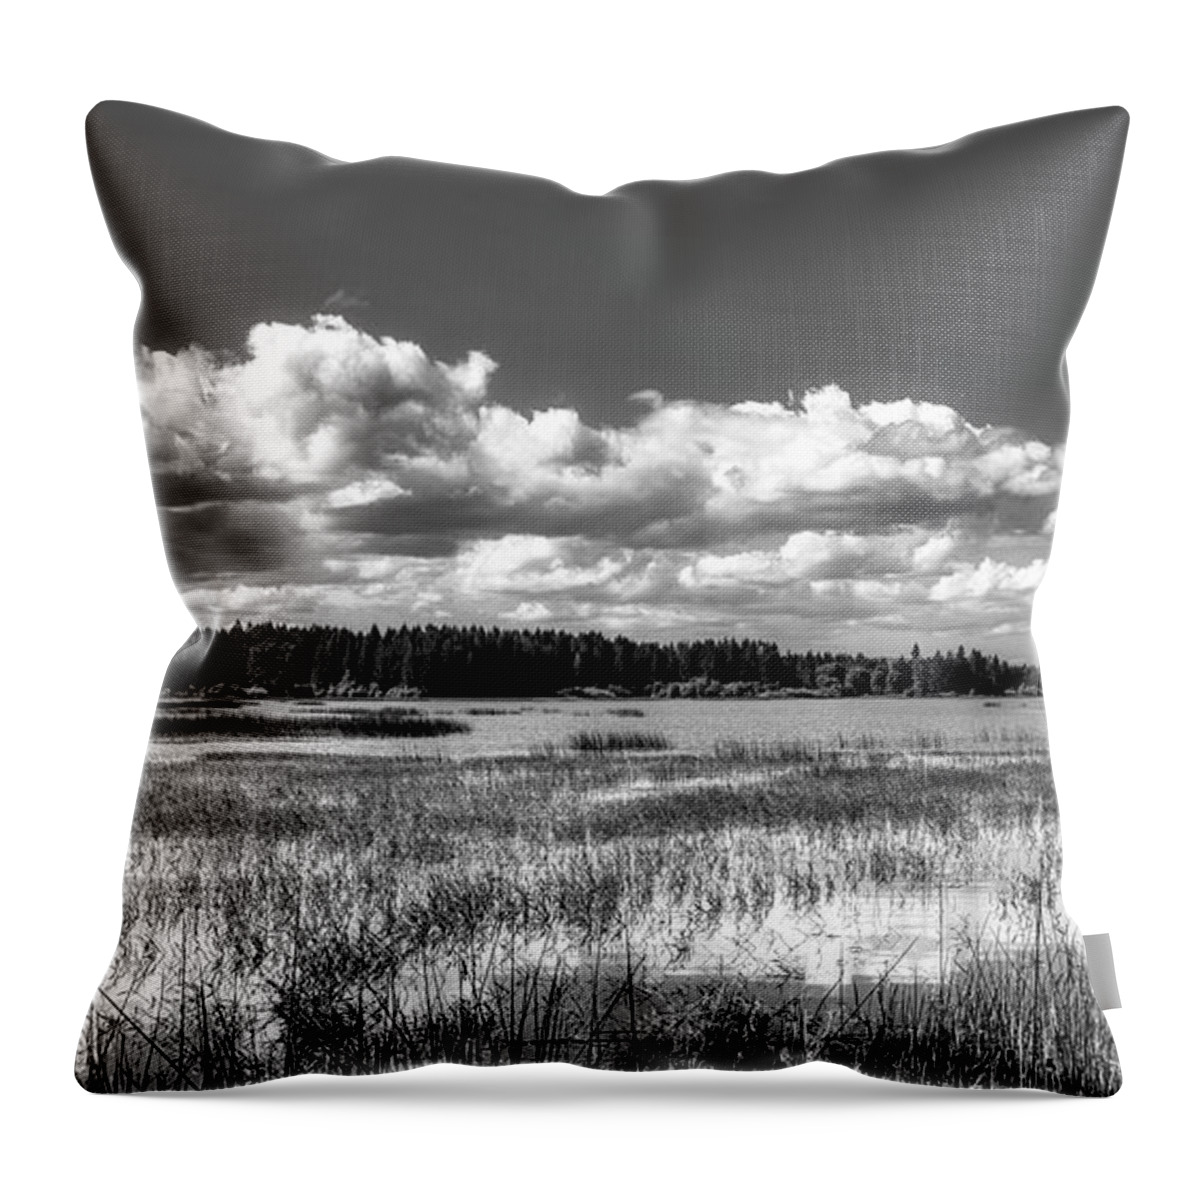 Marsh Throw Pillow featuring the photograph Marshland Reflection by Mountain Dreams